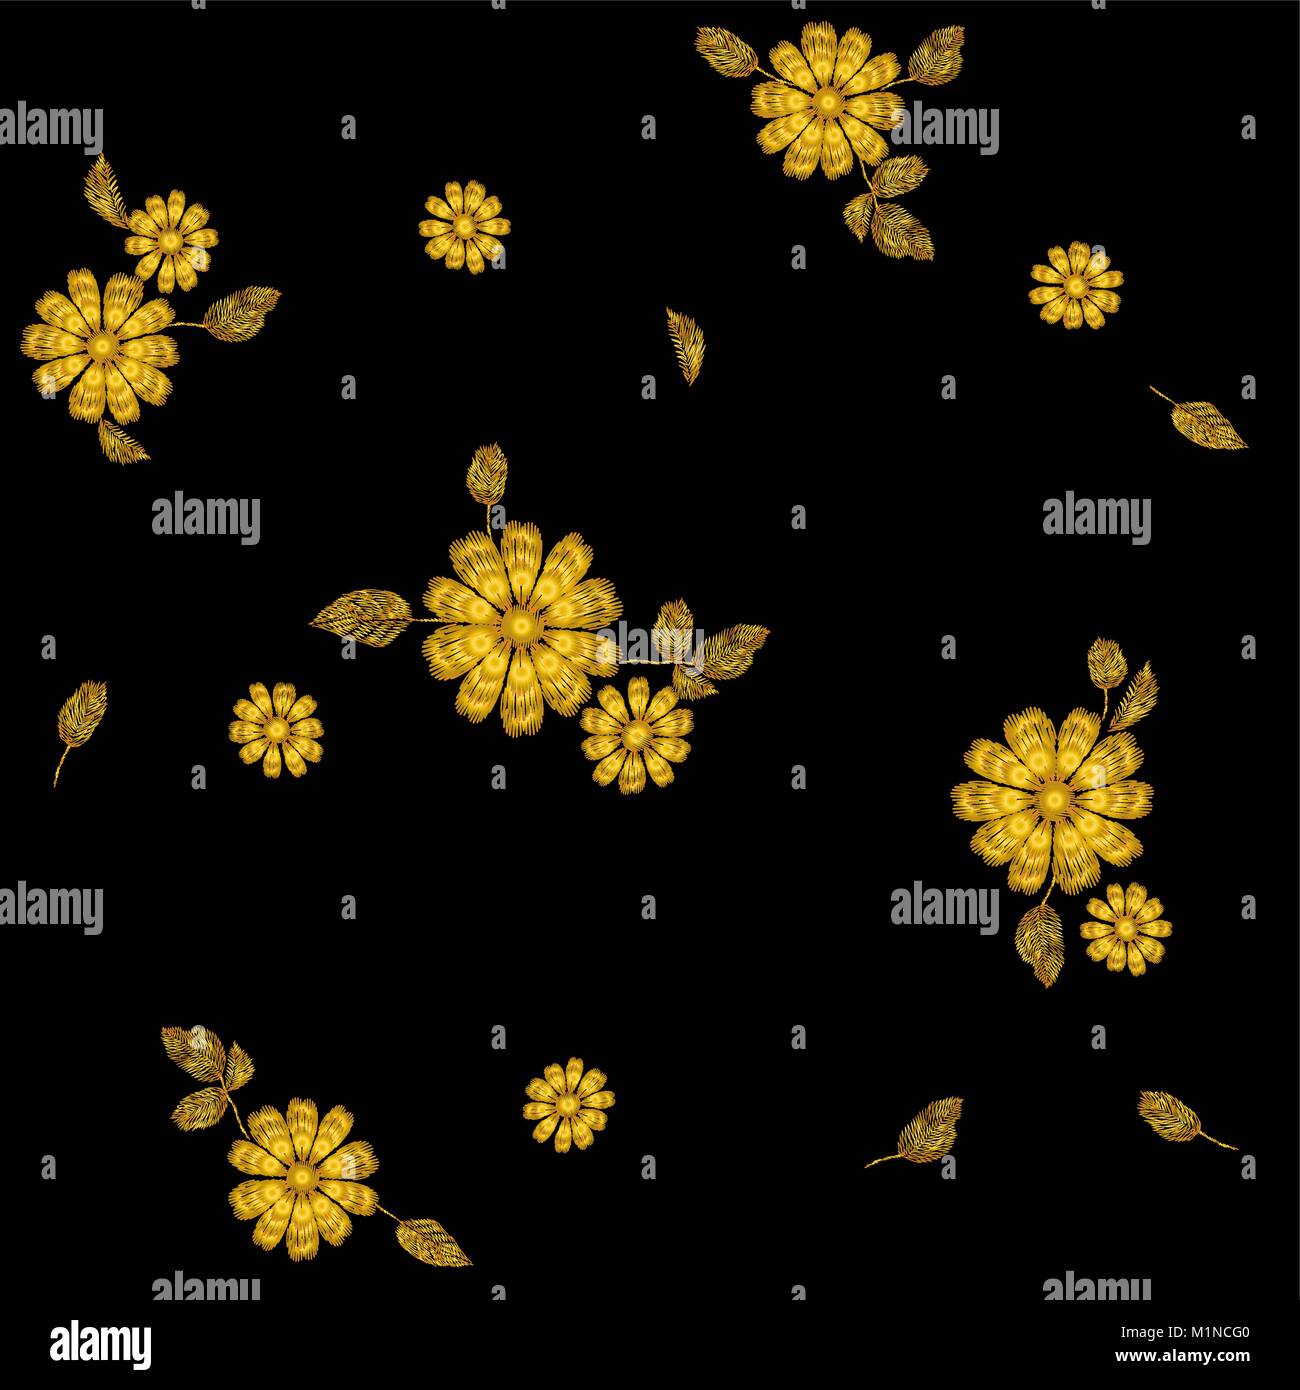 Gold flower embroidery seamless pattern. Fashion decoration stitched texture template. Ethnic traditional daisy field plant leaves textile print design vector illustration Stock Vector